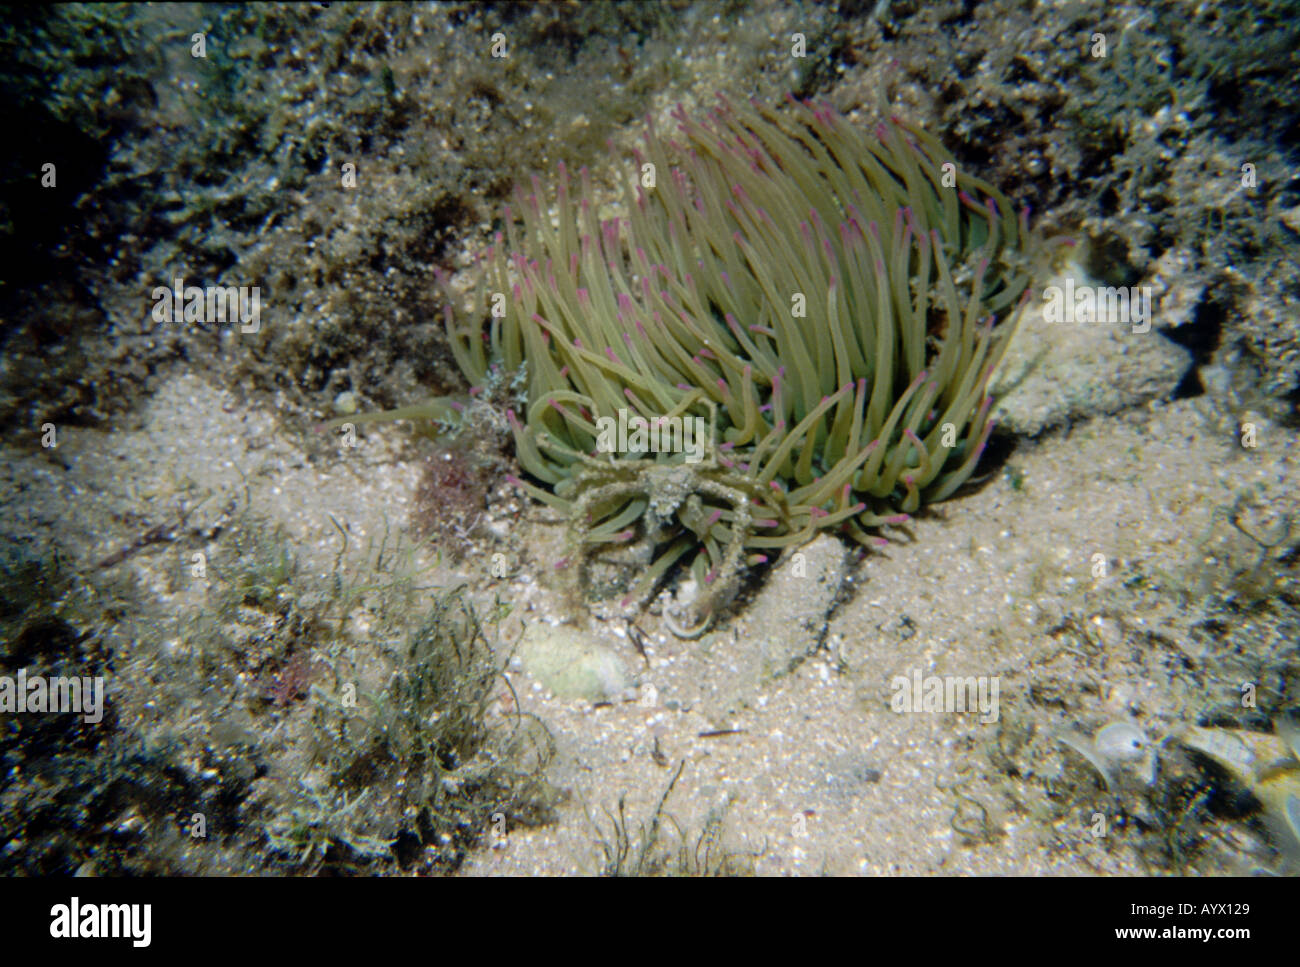 Symbiotic spider crab at the base of its pink-tipped anemony host. Aegean Sea. Stock Photo